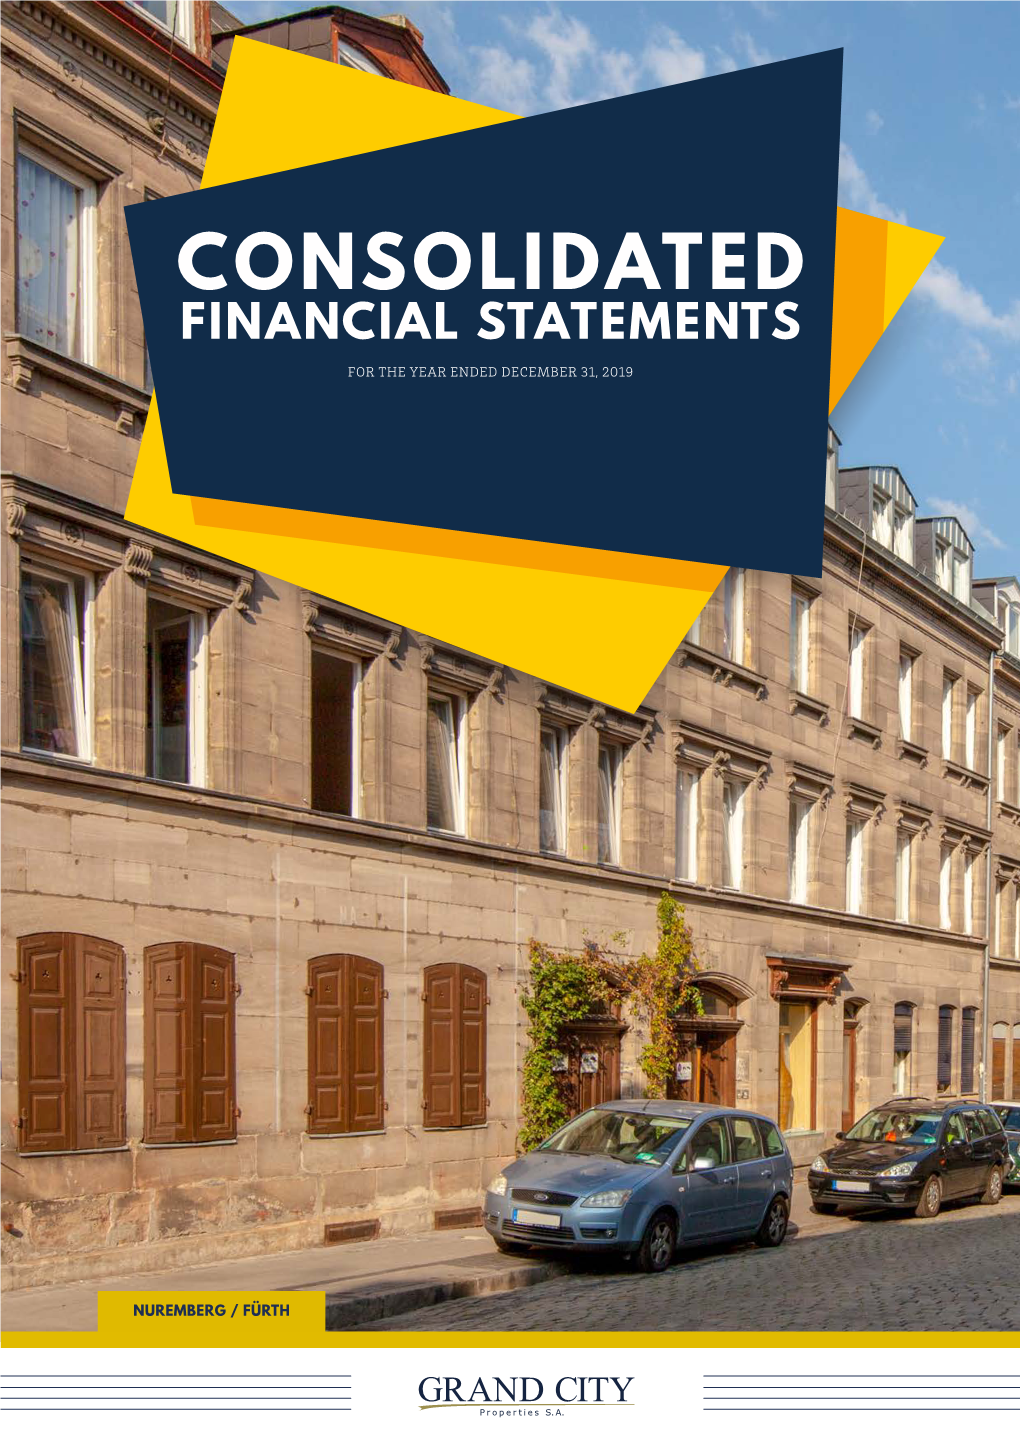 Consolidated Financial Statements for the Year Ended December 31, 2019